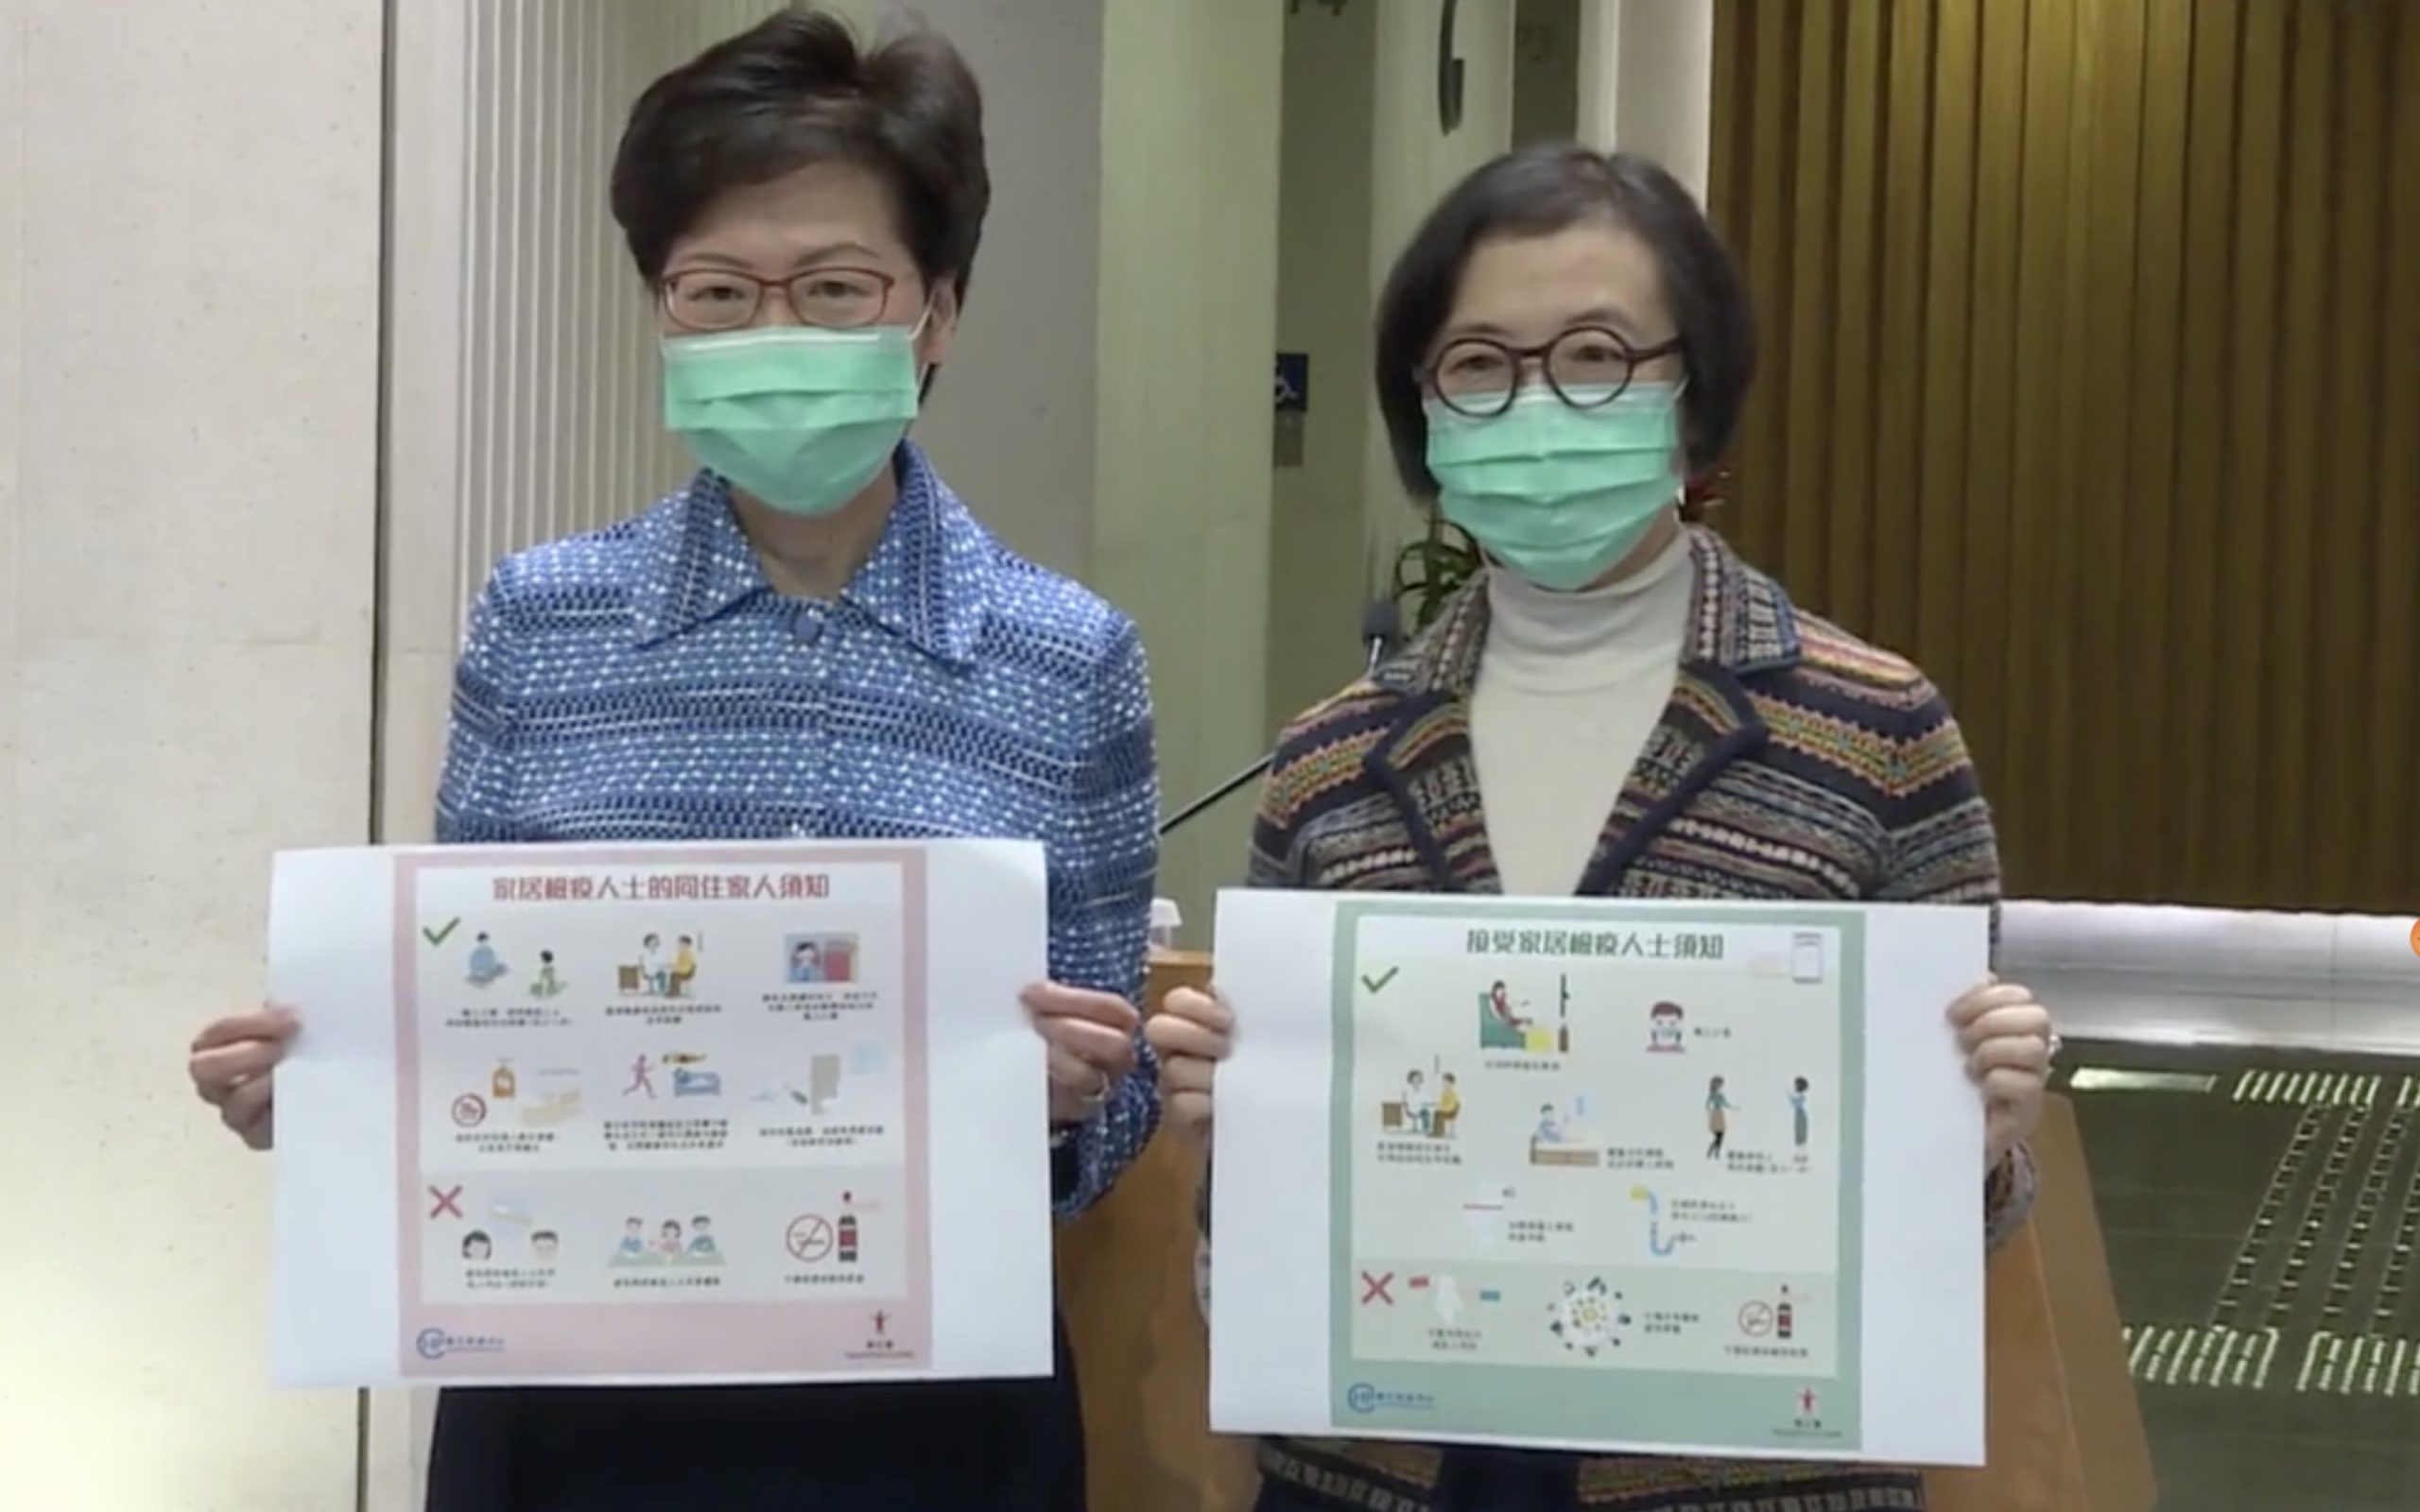 Chief Executive Carrie Lam and Health Secretary Sophia Chan hold up new posters for people under home quarantine. Screengrab via Facebook video/i-Cable.